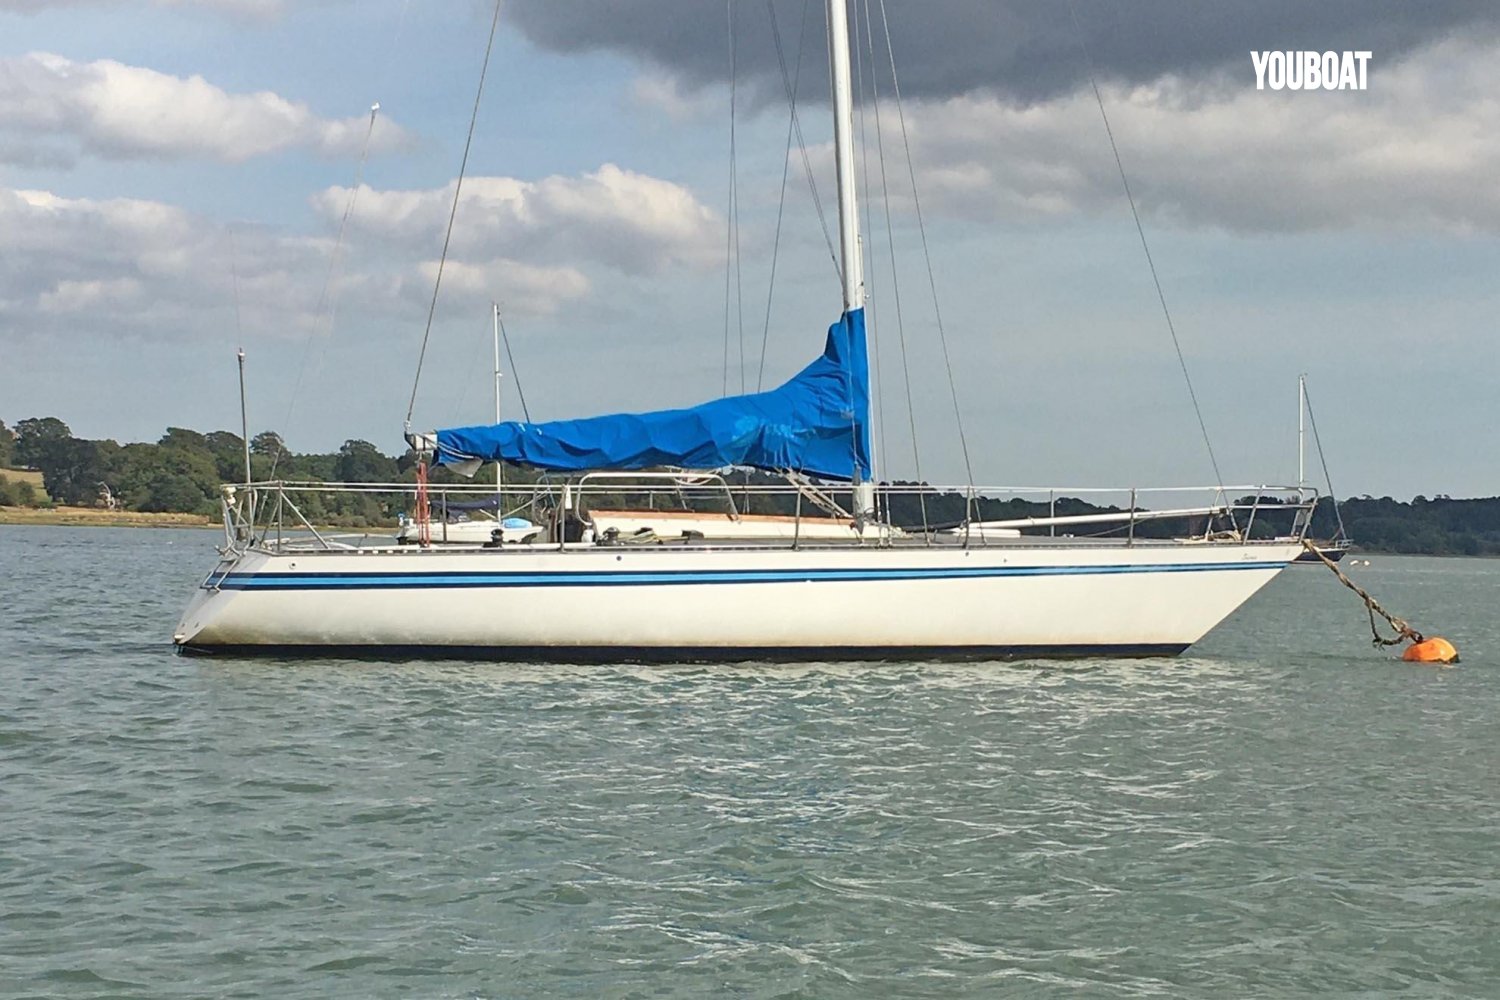 aphrodite 101 used for sale - sailing boat sloop in ipswich, united kingdom